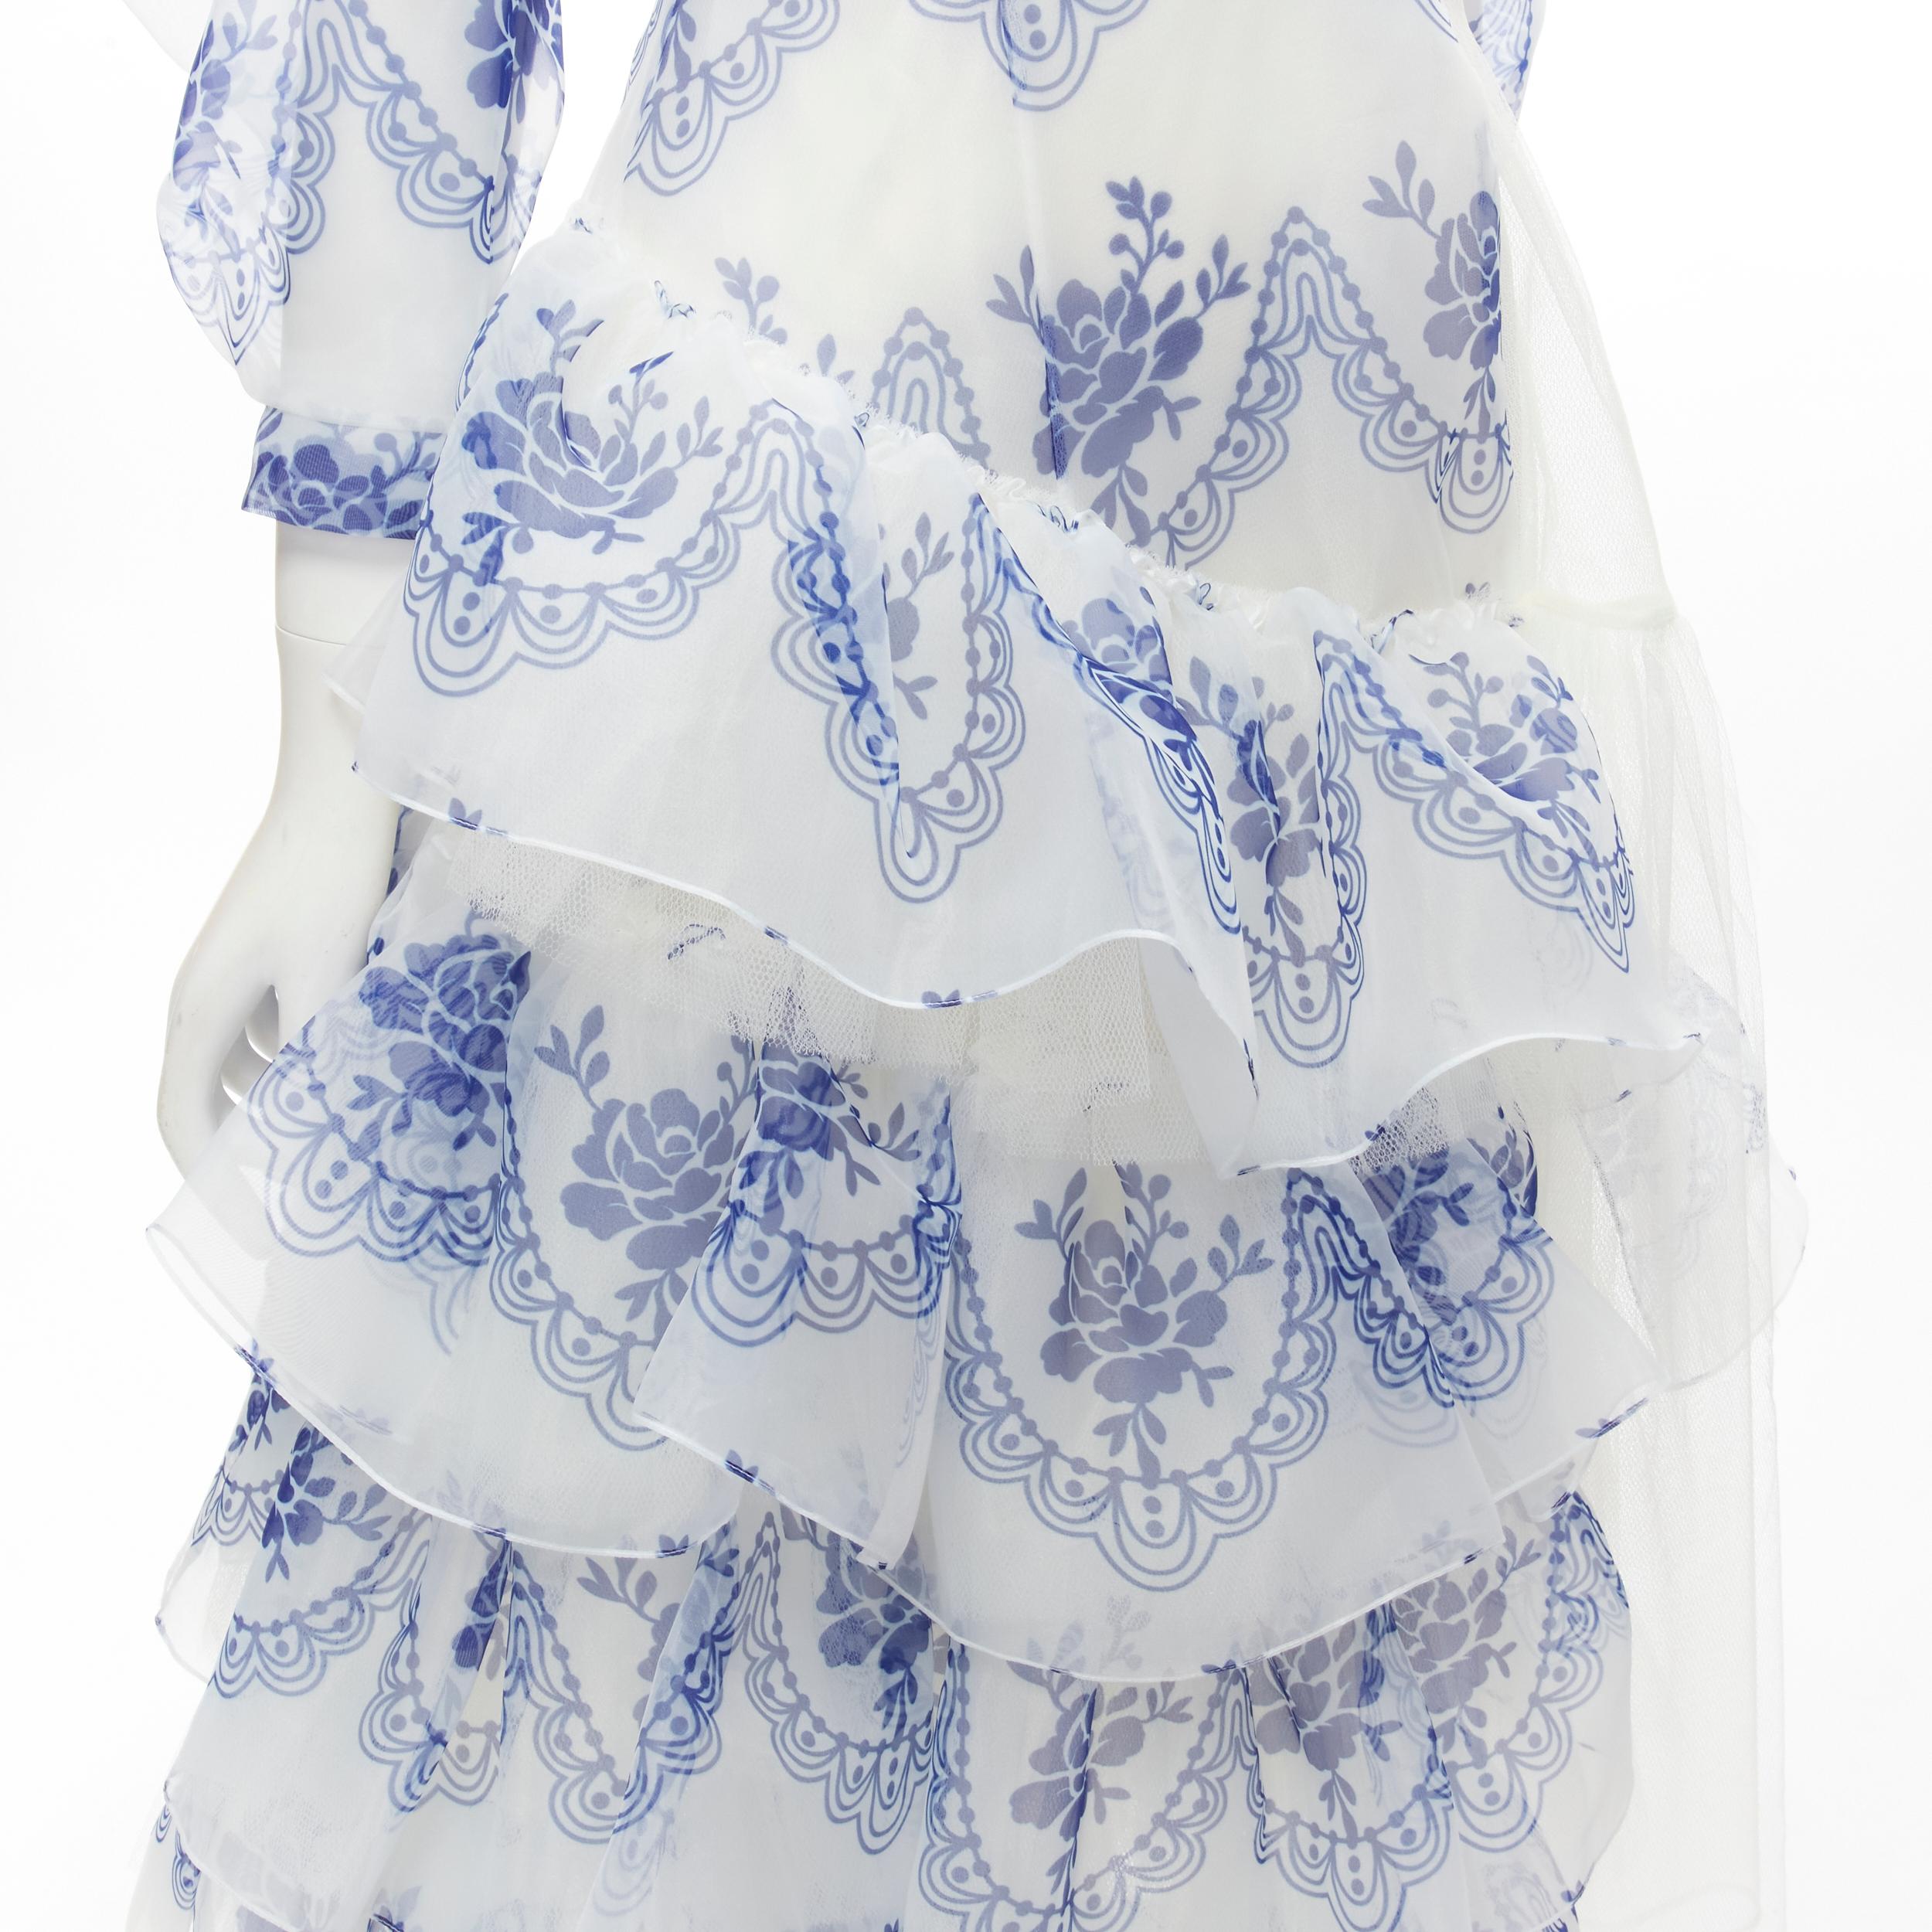 SIMONE ROCHA 2020 Runway Delft Wrengirl white blue tulle tiered dress UK6 XS
Brand: Simone Rocha
Collection: Spring Summer 2020 Runway
Material: Polyester
Color: White
Pattern: Floral
Closure: Zip
Extra Detail: Dropped shoulder puff sleeves. Dropped